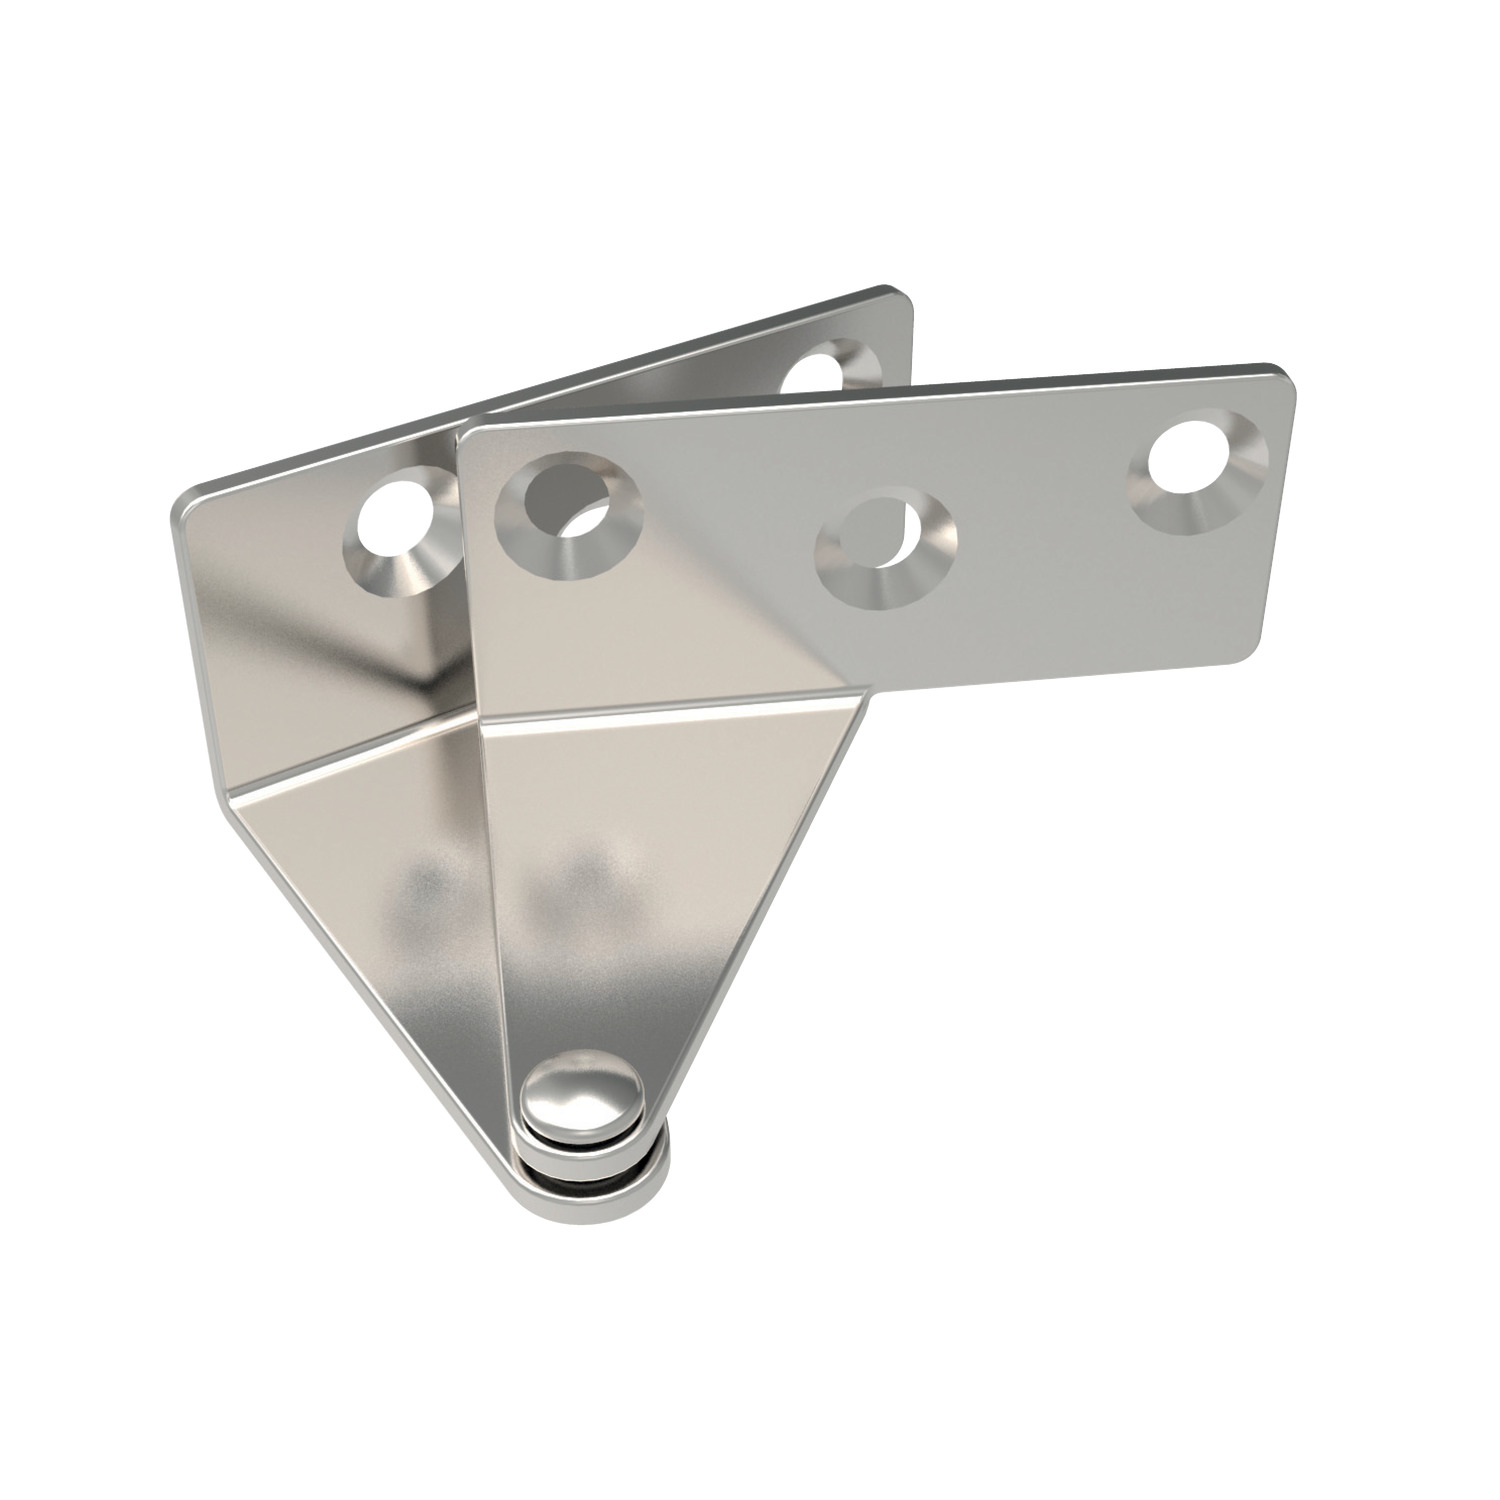 Surface Mount - Pivot Hinges Surface mount pivot hinges made from stainless steel (AISI 430) with satin finish. Max door weight of 1.8 Kg per hinge pair.